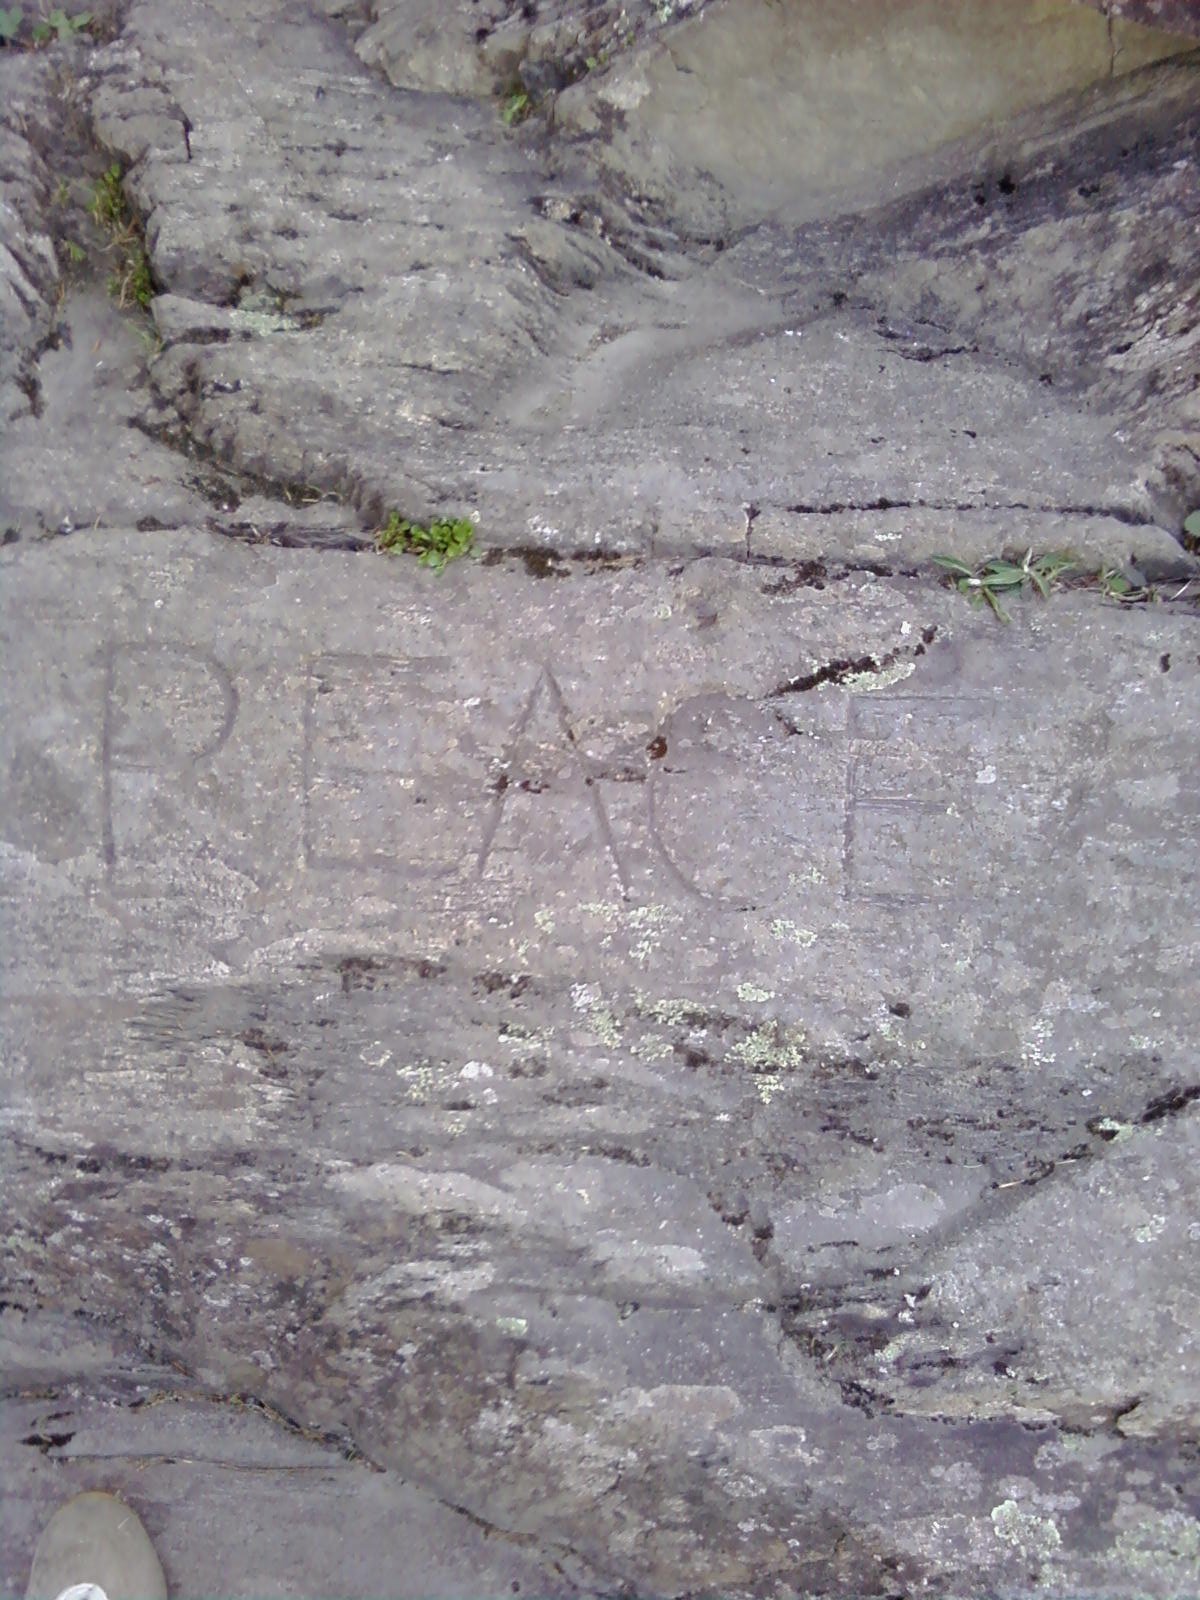 PEACE carved in rock